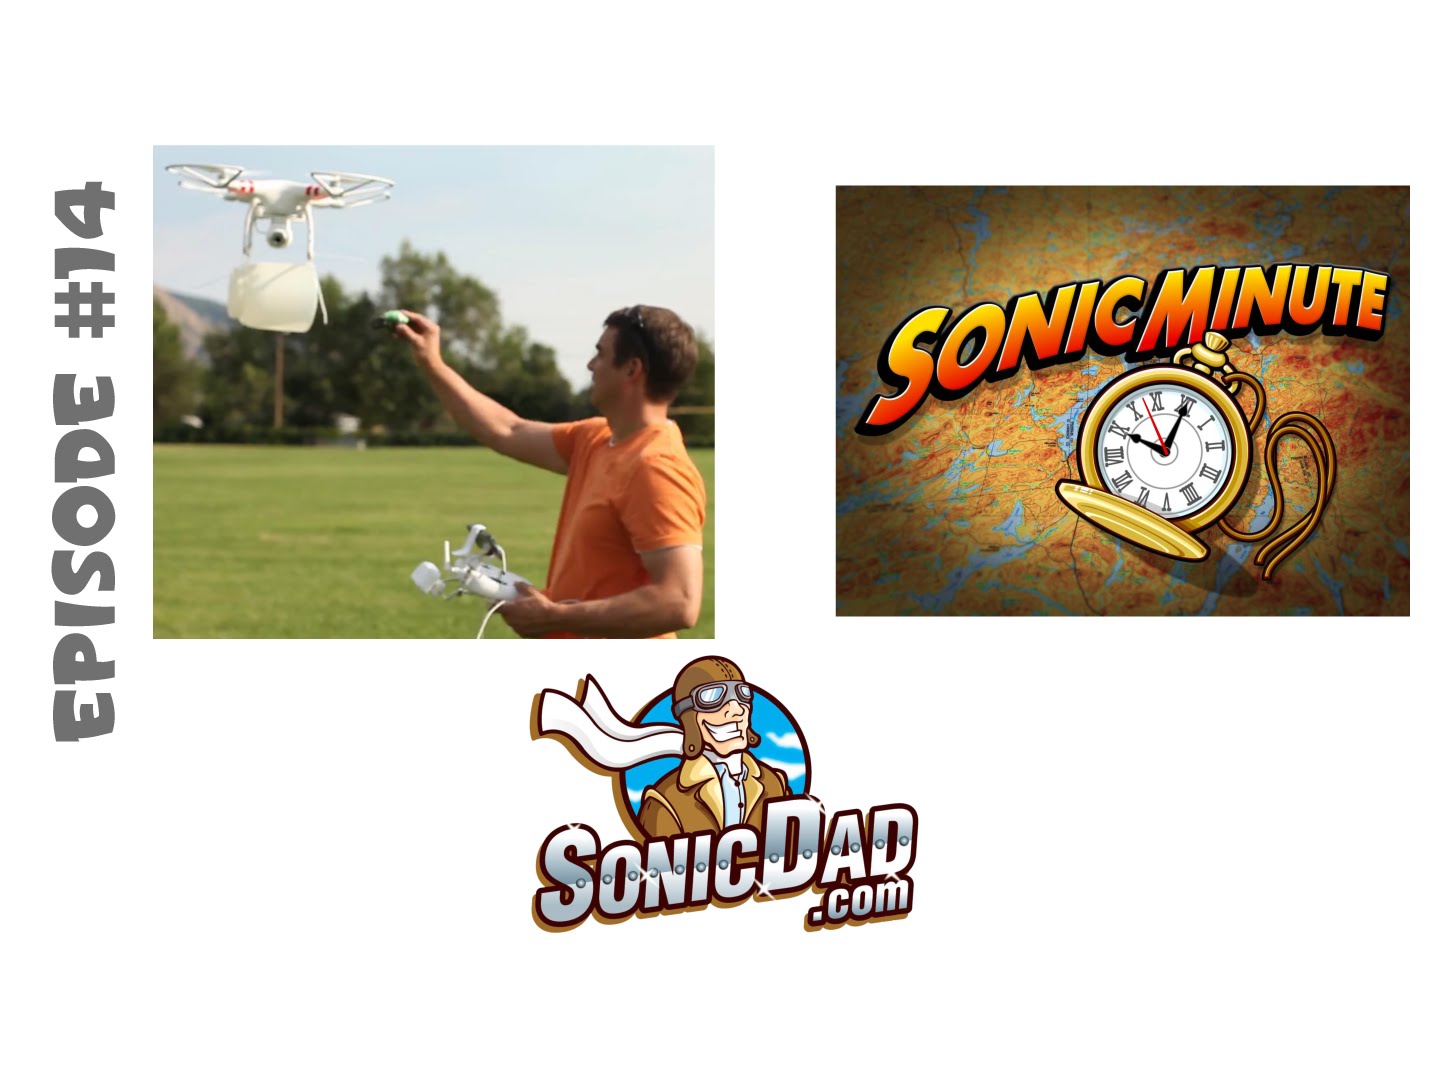 Quadcopter Parachute Drop from 300 feet – Sonic Minute Episode 14